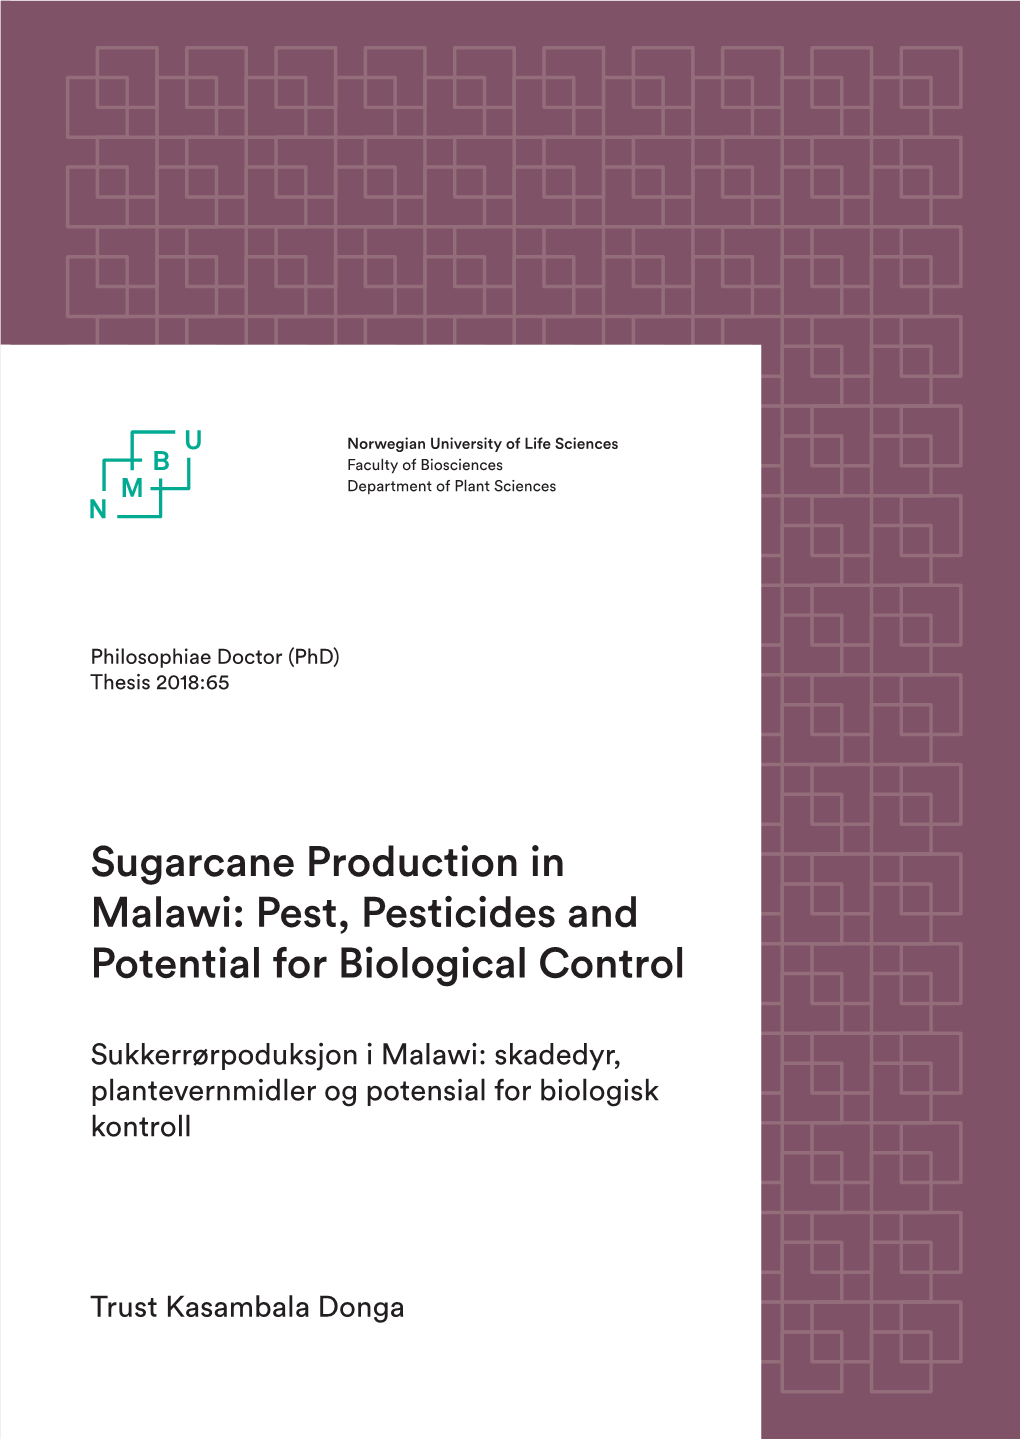 Sugarcane Production in Malawi: Pest, Pesticides and Potential for Biological Control